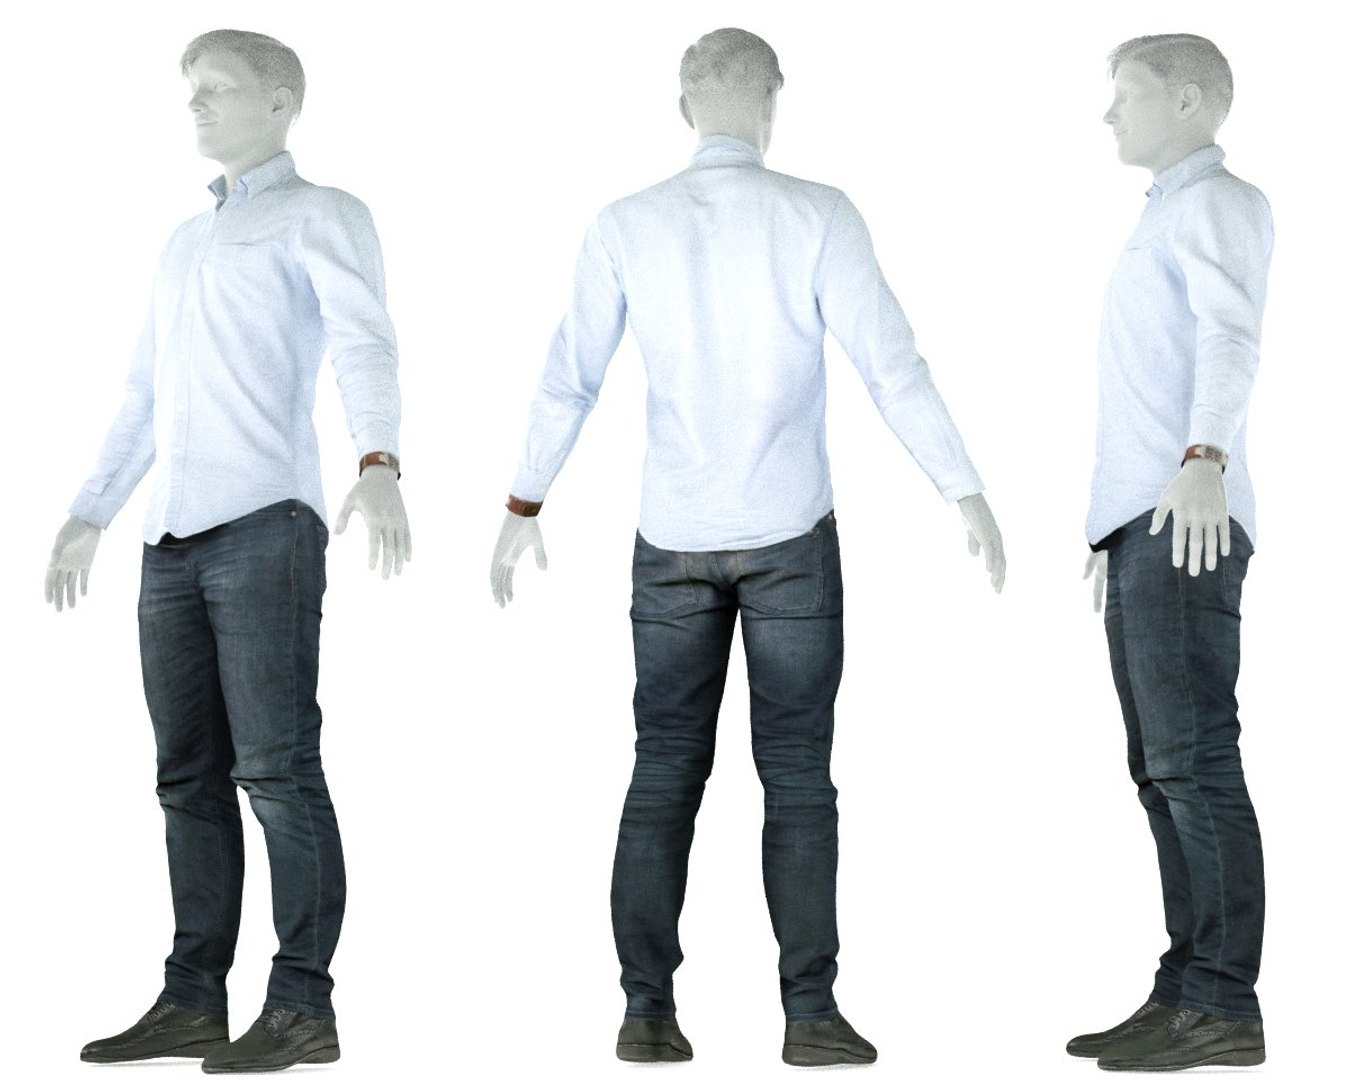 Male clothing outfit 3D model - TurboSquid 1329805